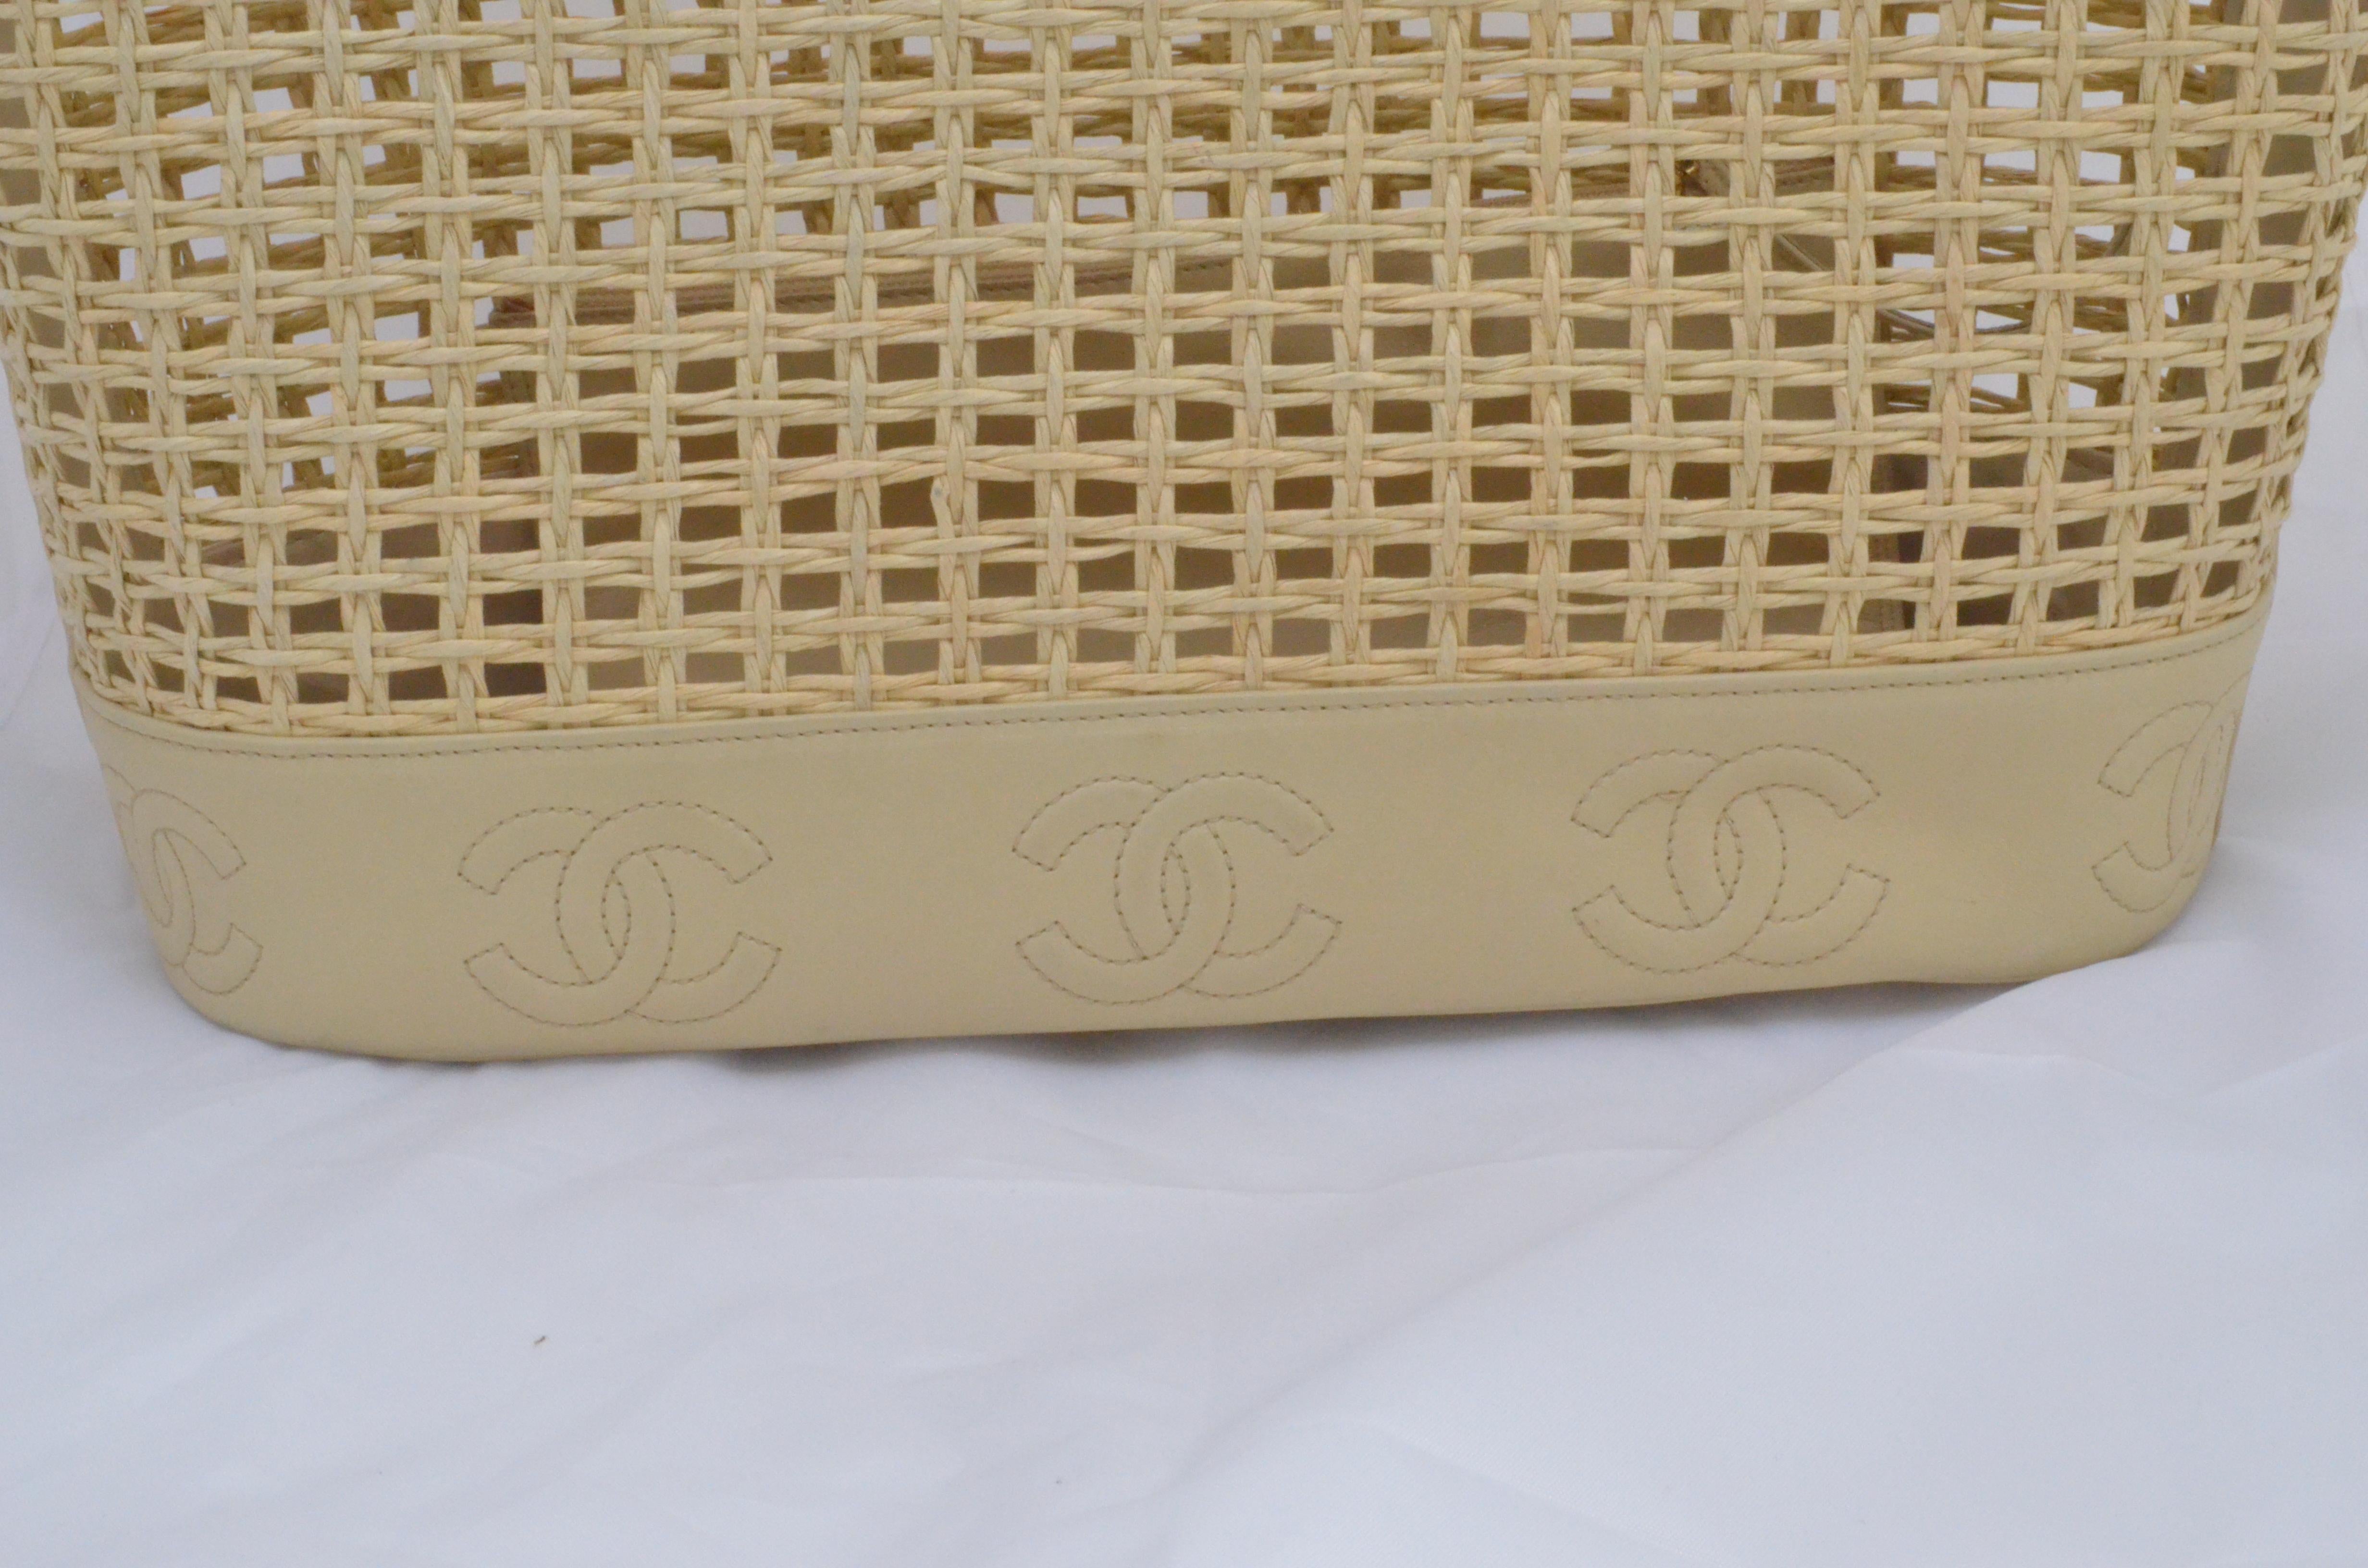 Chanel 1996-97 Vintage Beige Leather Woven Tote Bag 2